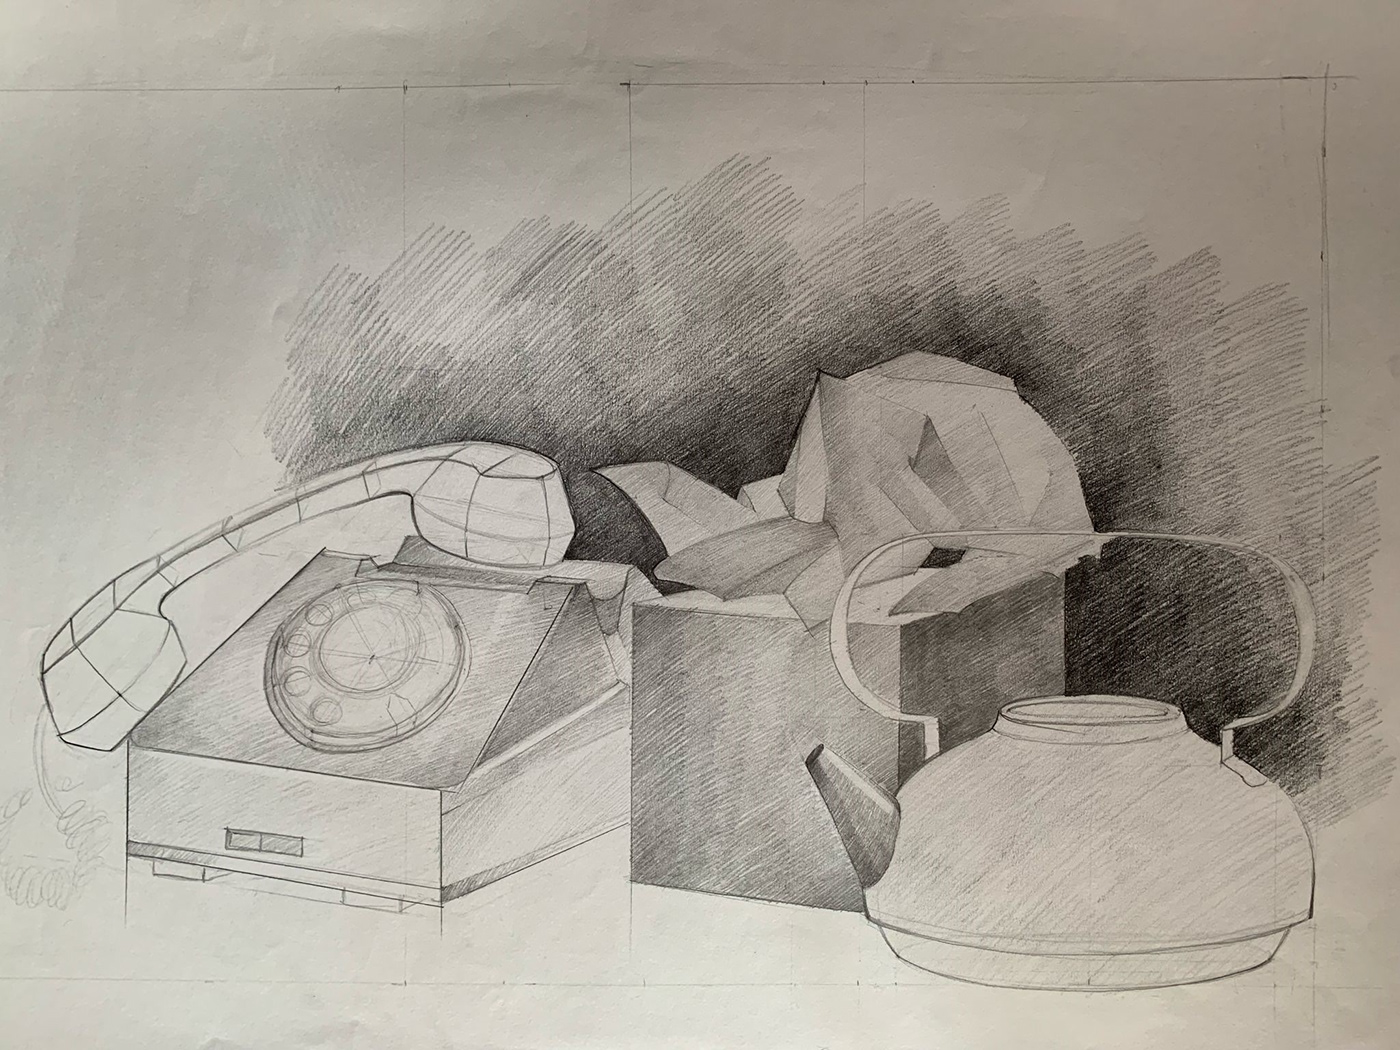 A telephone surrounded by random objects